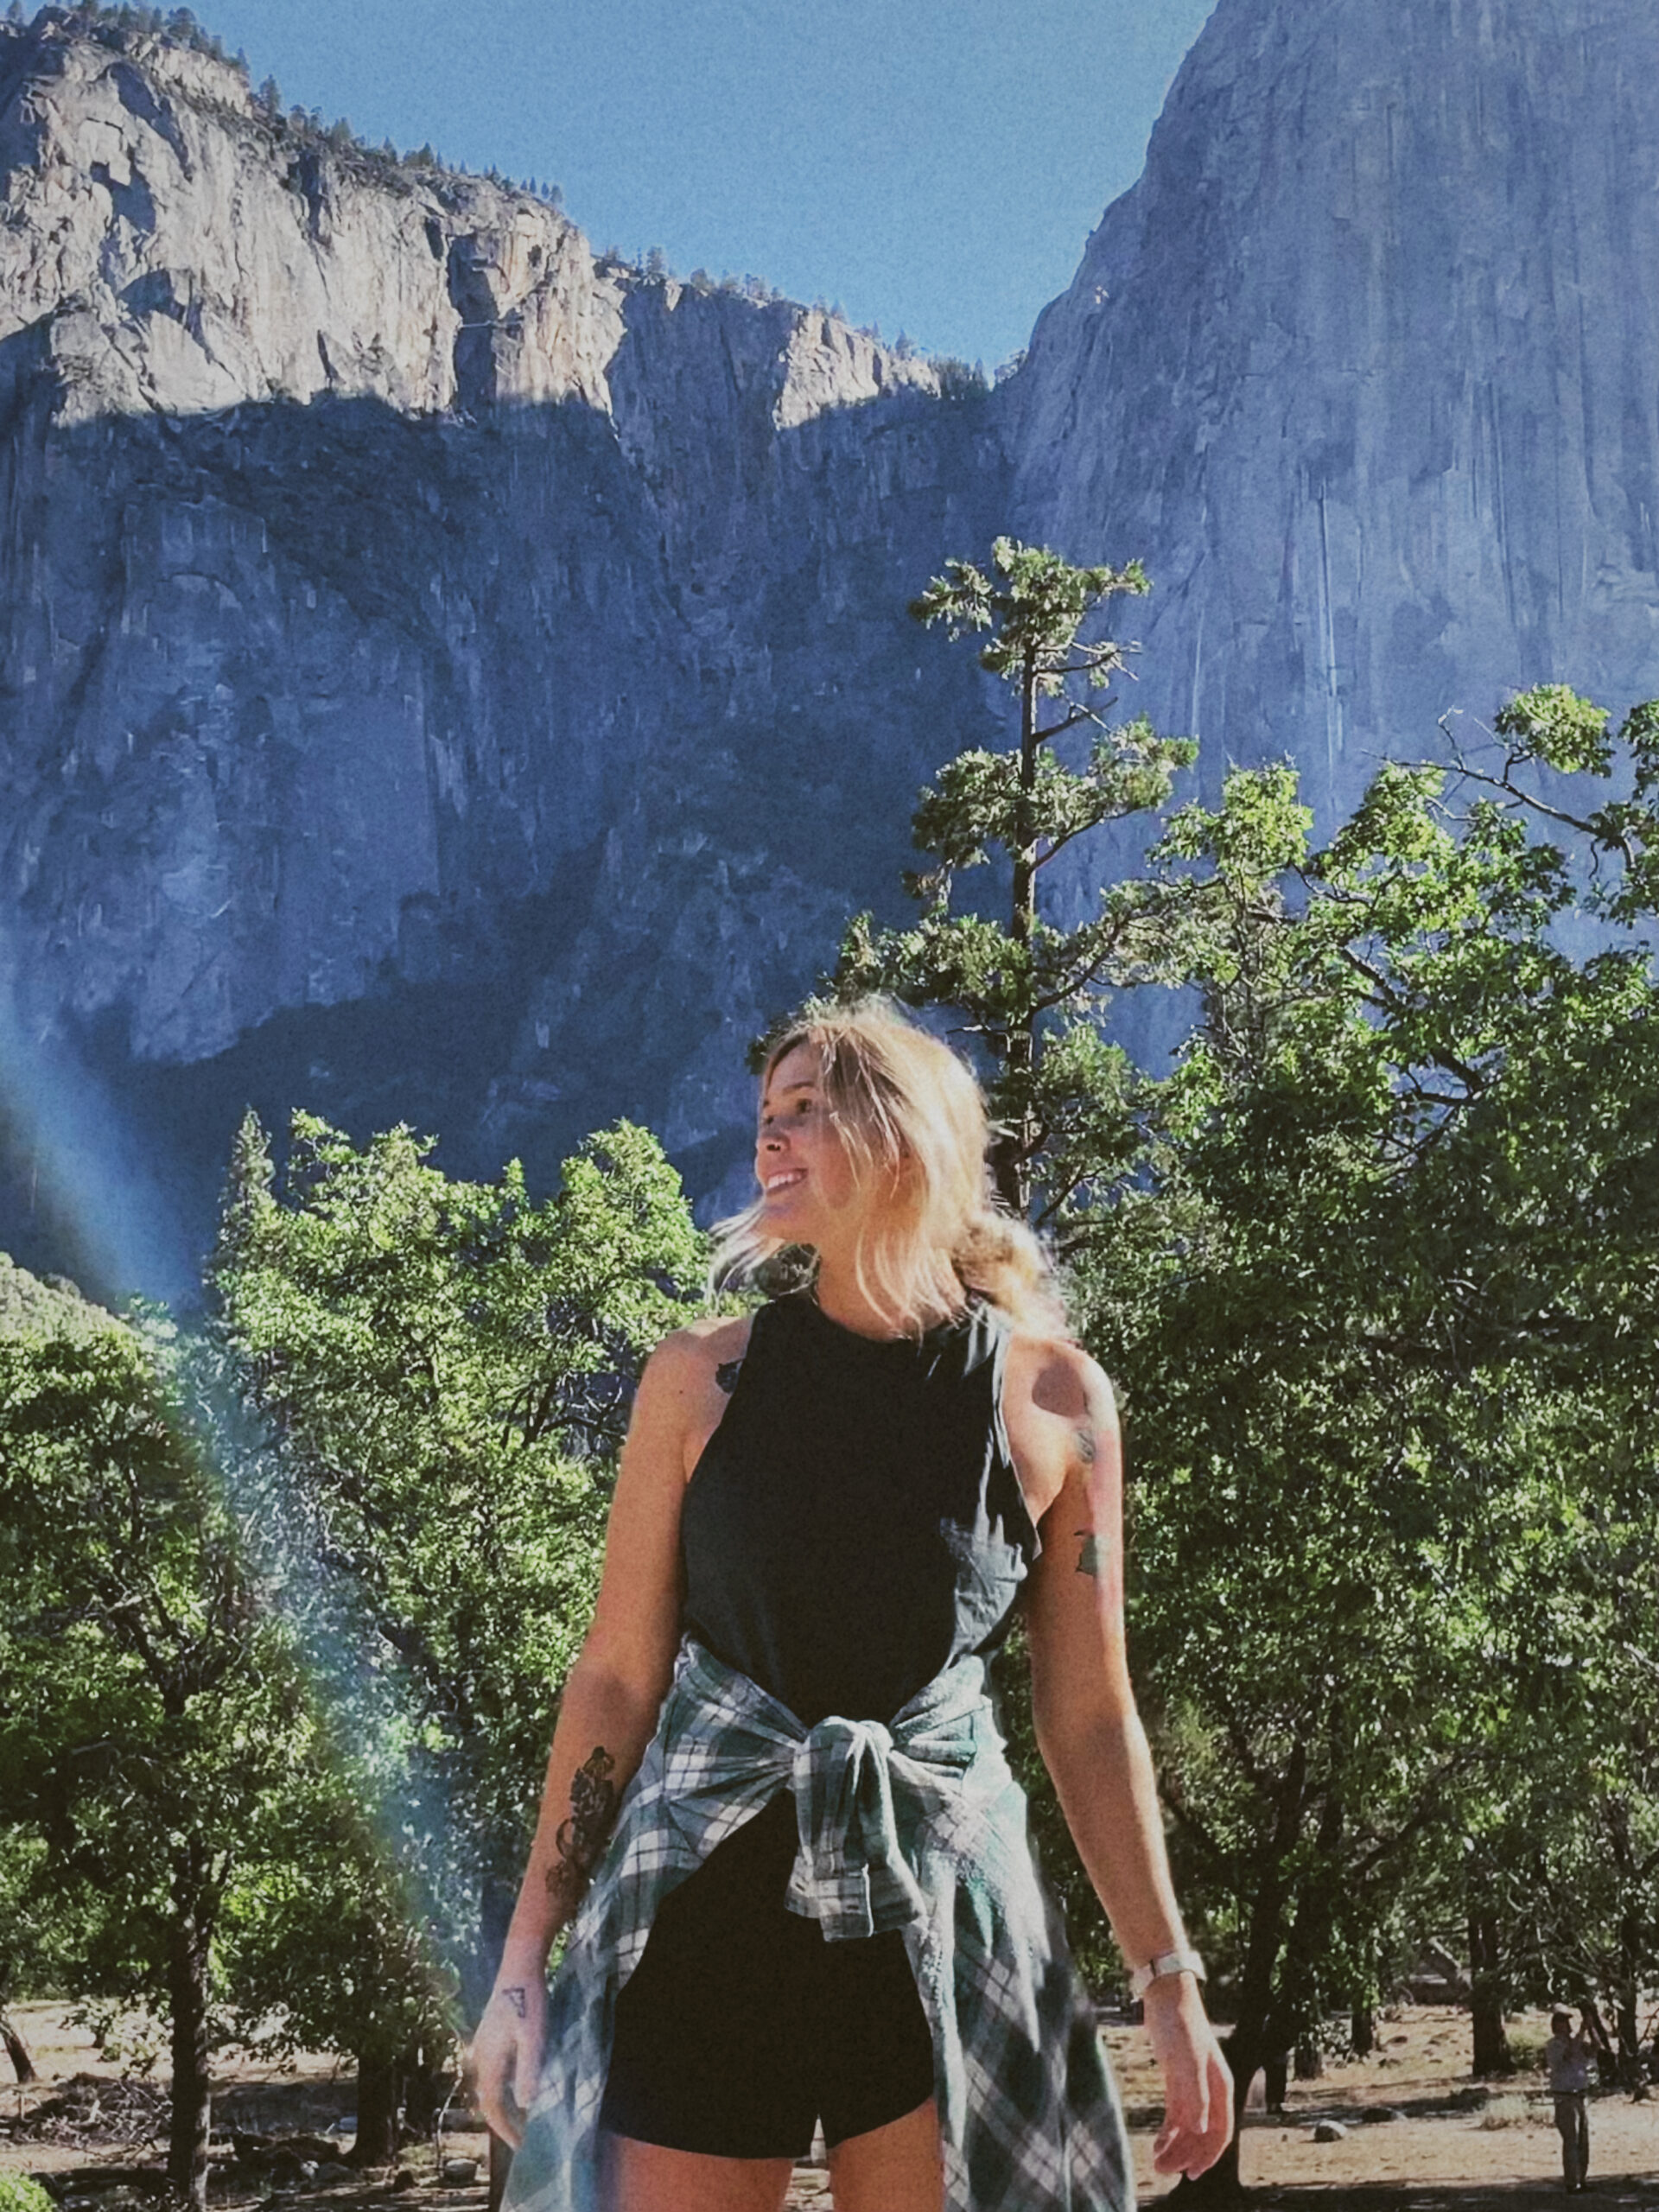 Girl at yosemite staying healthy while travelling